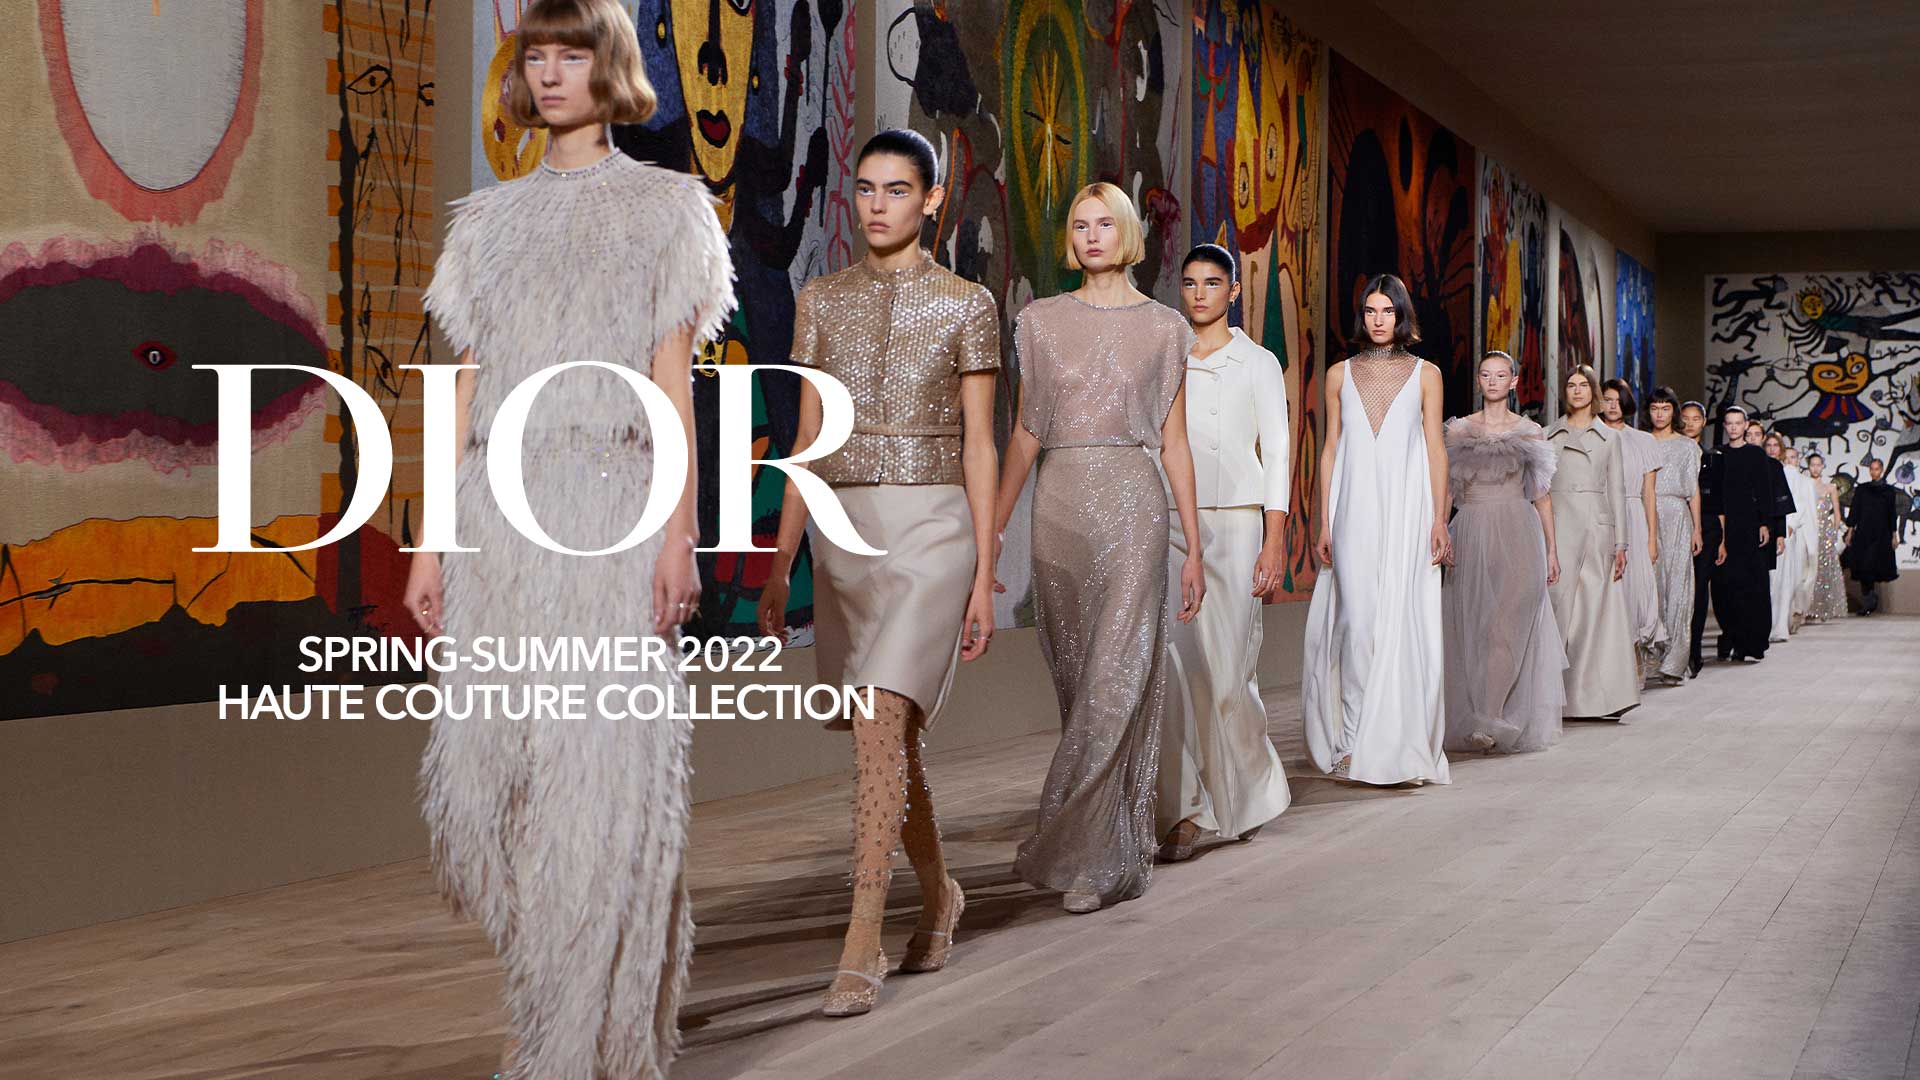 SPRING-SUMMER 2022 DIOR HAUTE COUTURE COLLECTTION